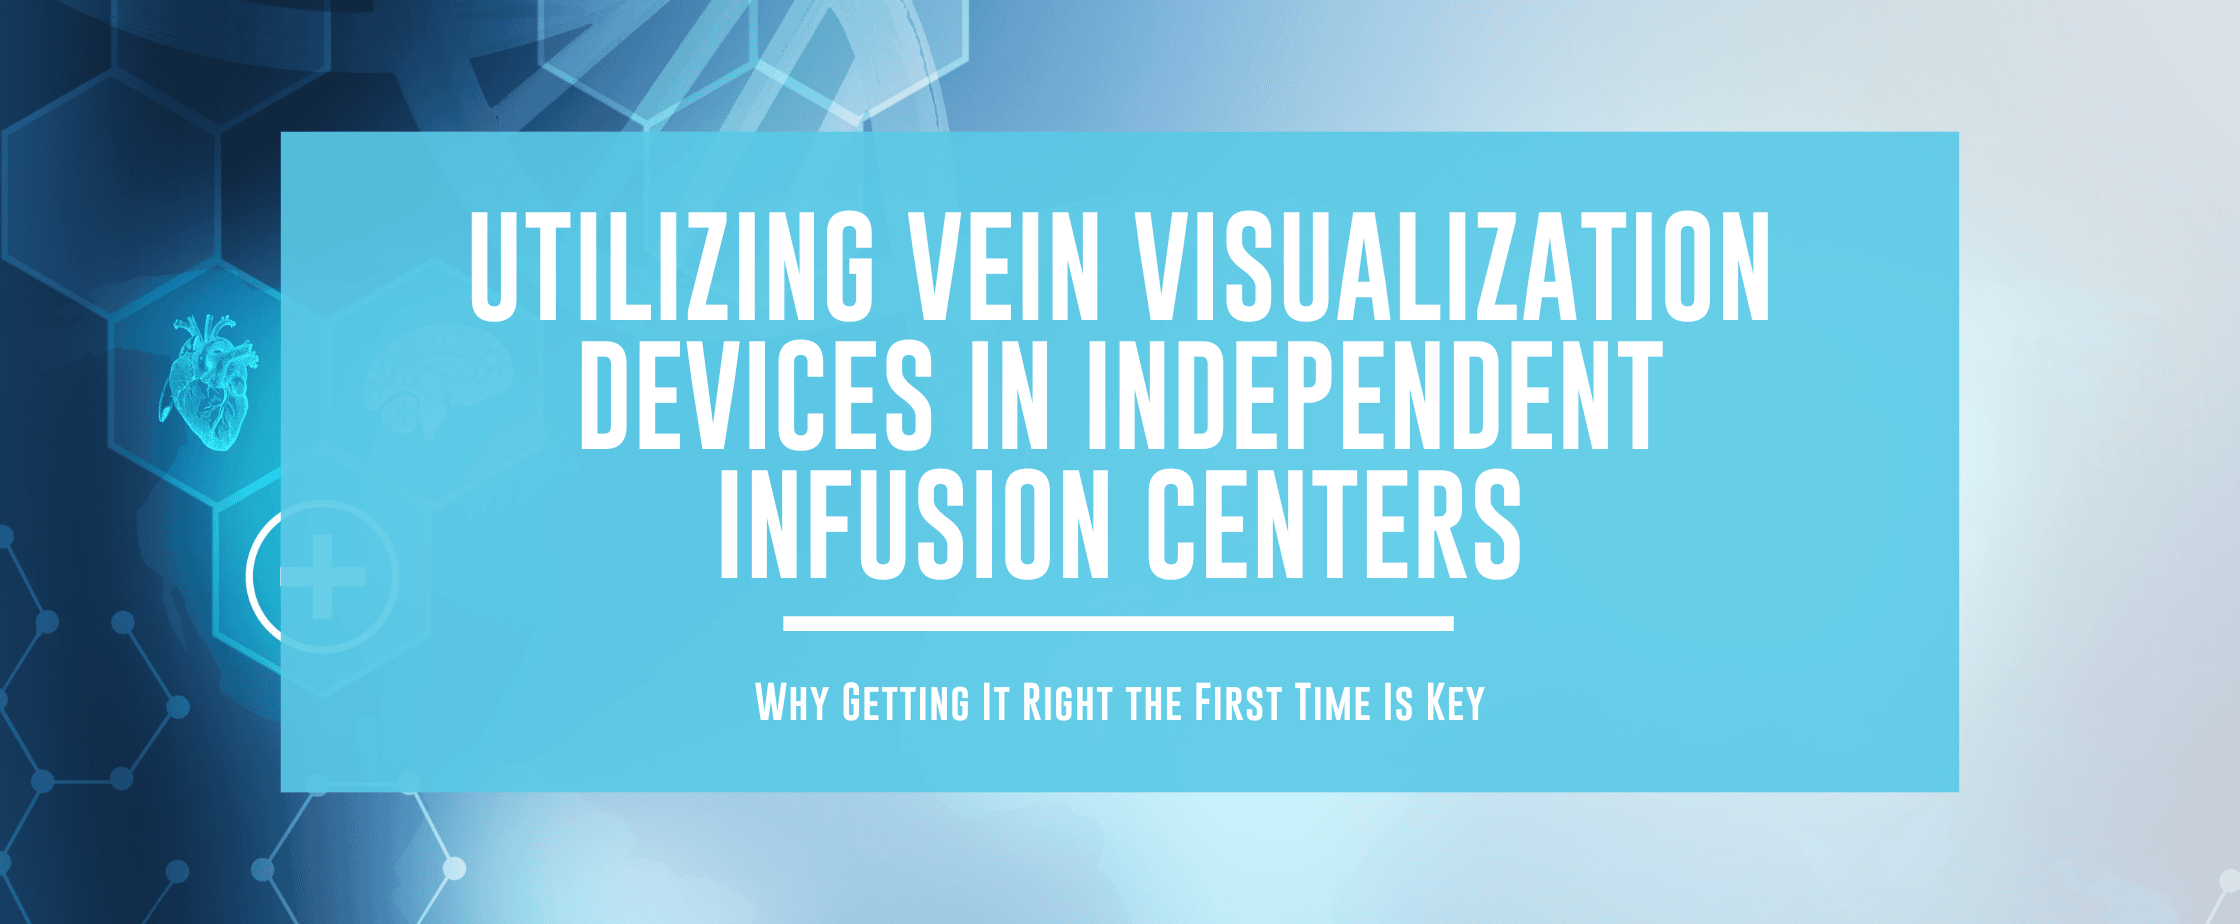 Featured image for Utilizing Vein Visualization Devices In Independent Infusion Centers